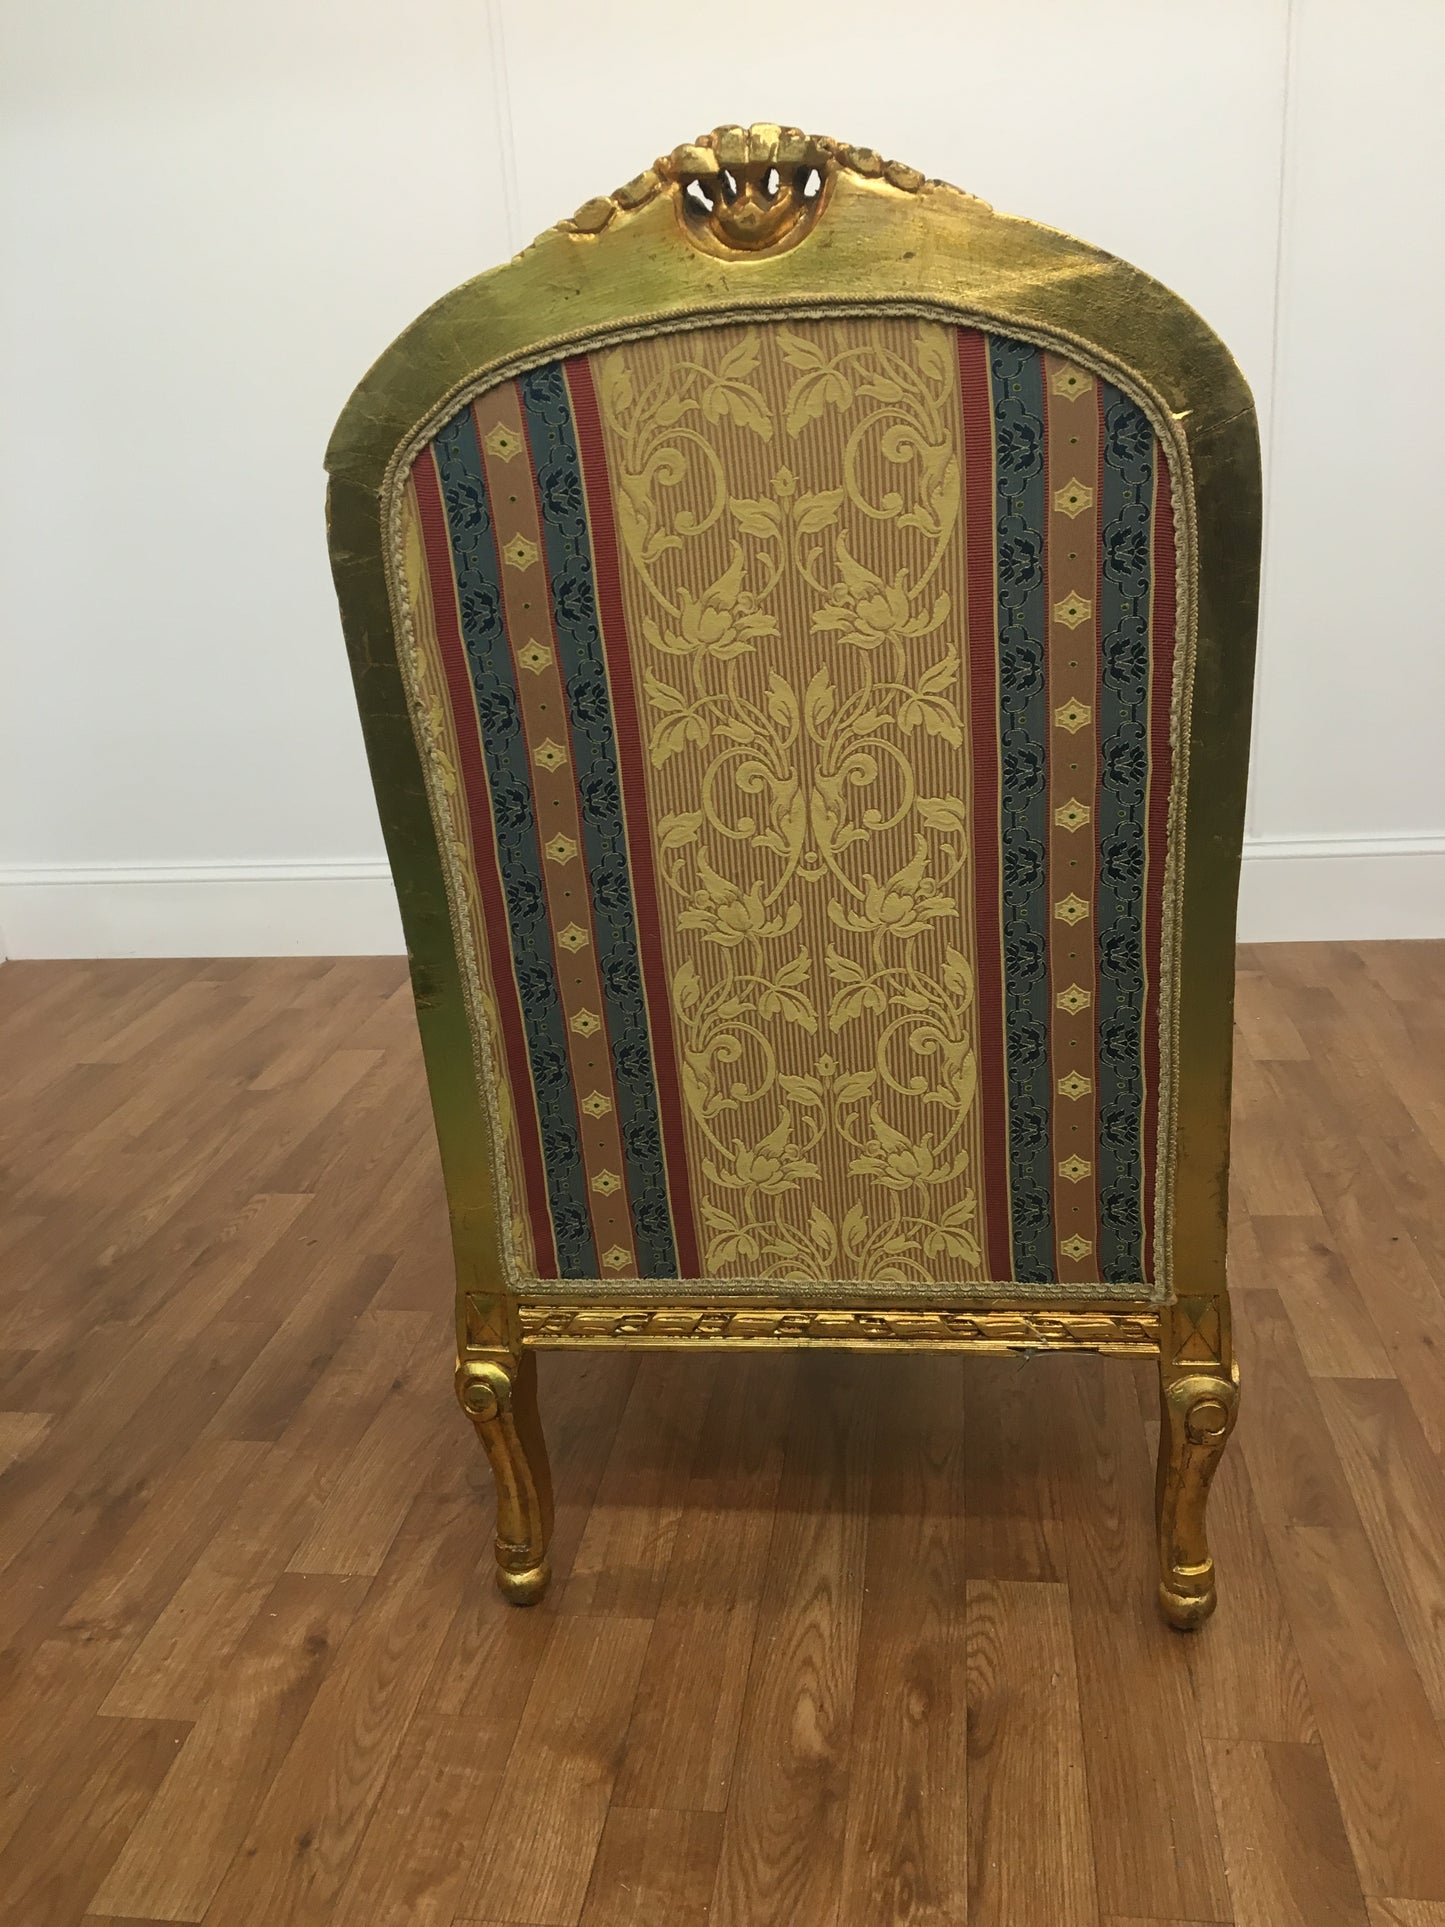 RED, GOLD  AND BLUE STRIPED ORNATE ARM CHAIR